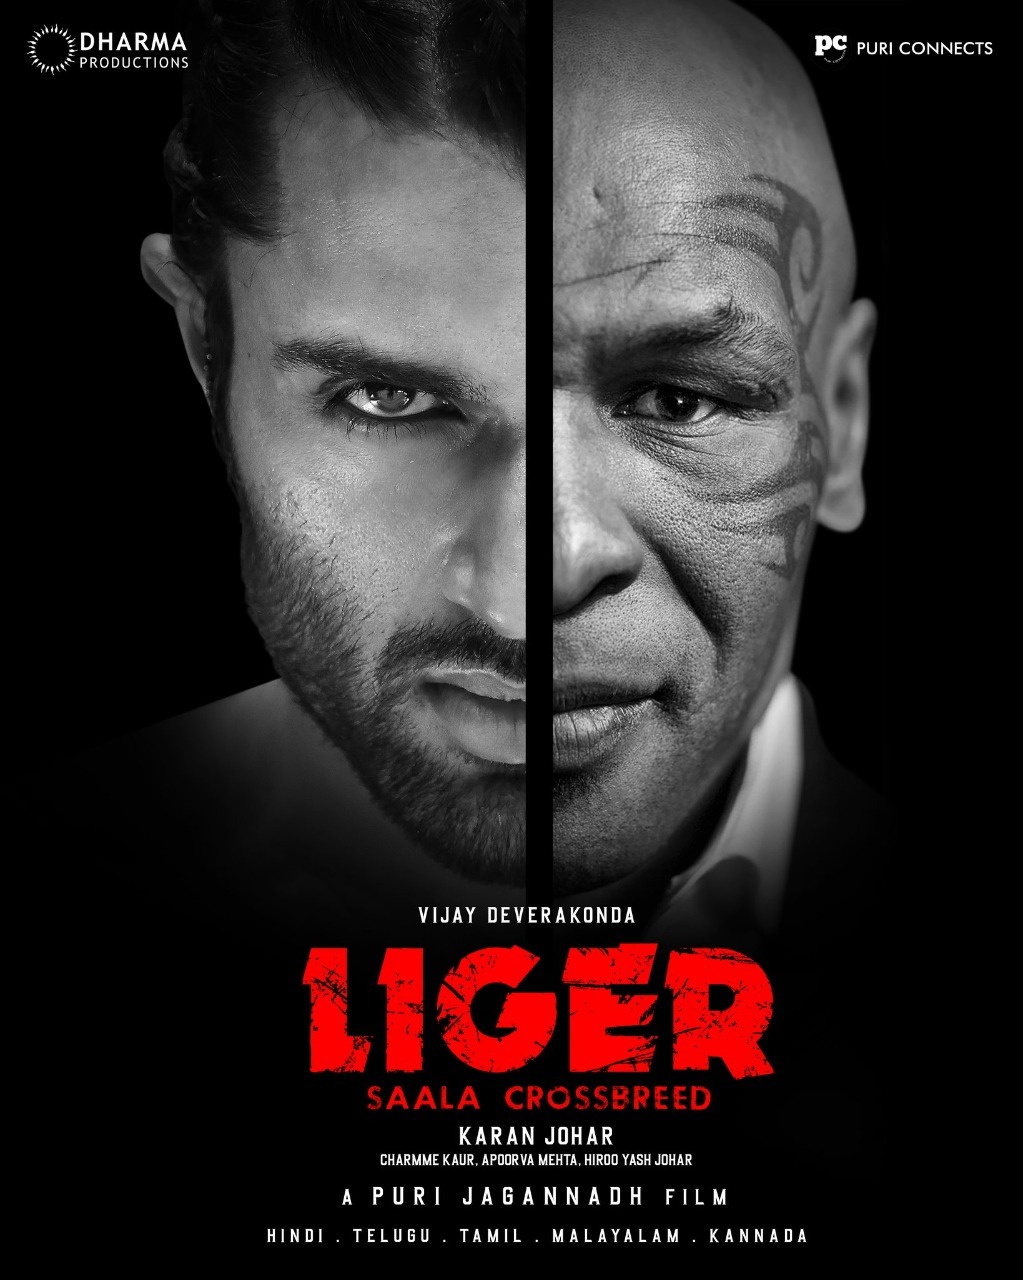 LIGER Saala Crossbreed Theatrical Trailer Launch On July 21st In Hyderabad and Mumbai